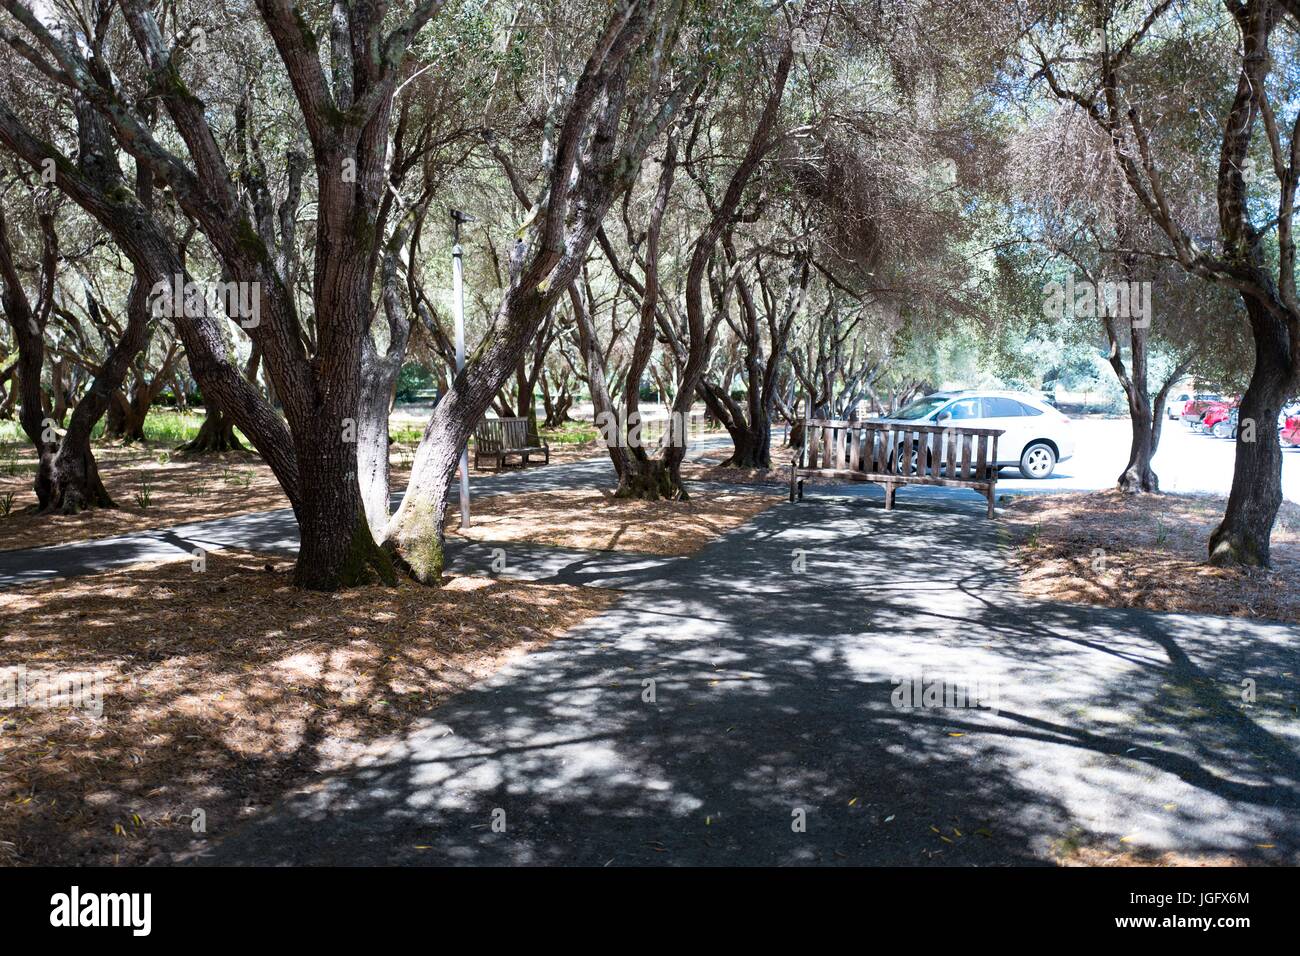 Numerous trees provide shade near the entrance at Filoli, a preserved country house, formal garden and estate operated by the National Trust for Historic Preservation in Woodside, California, June 23, 2017. Stock Photo